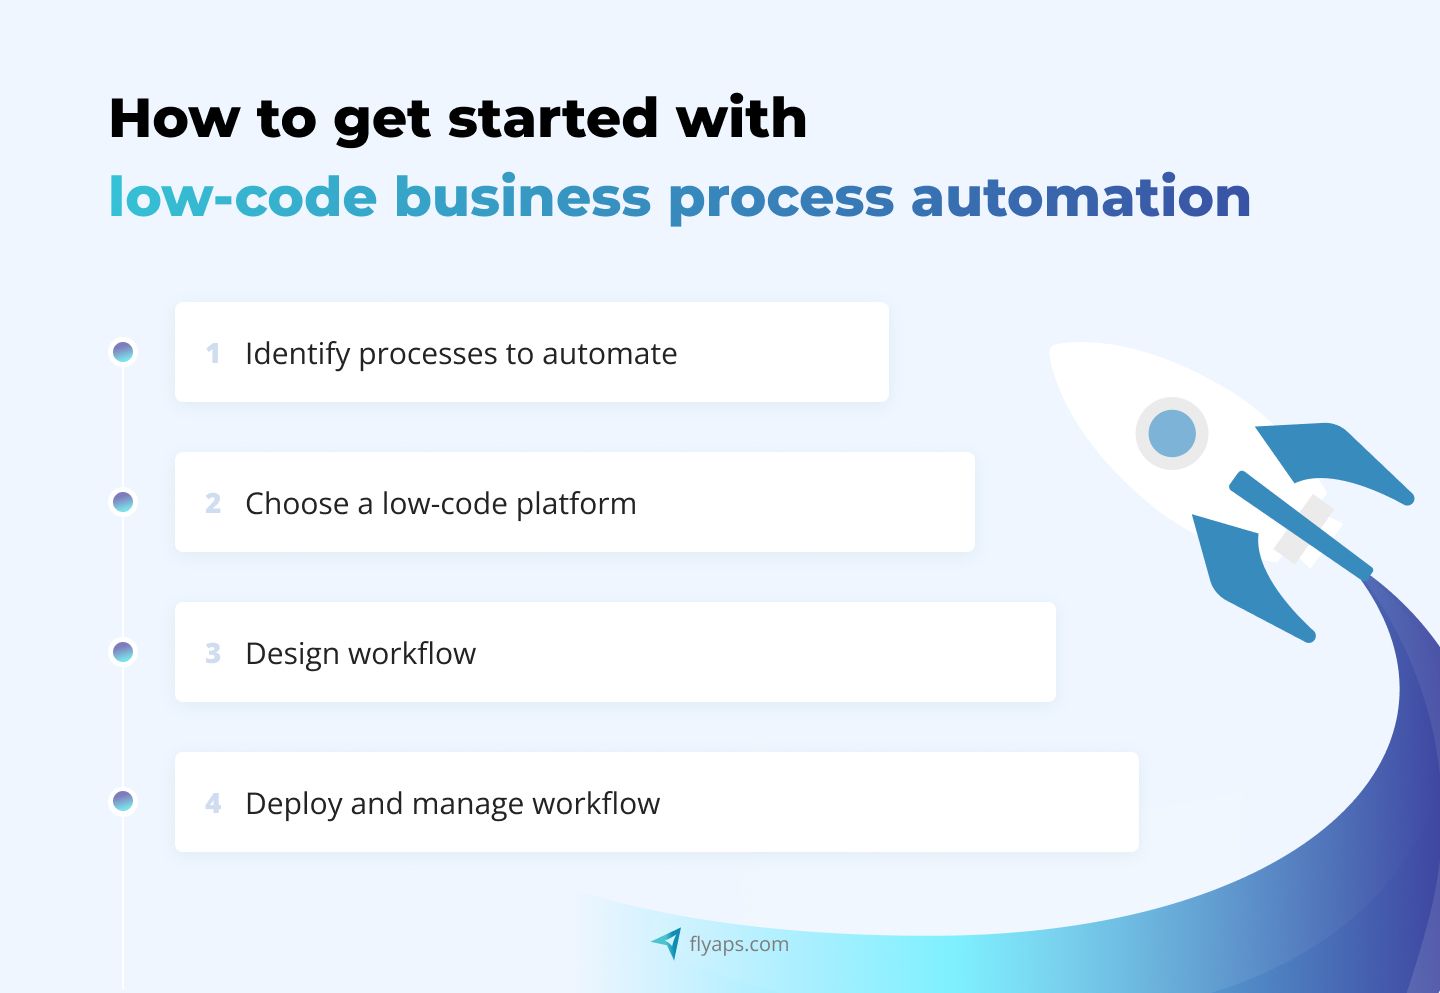 Four-phase steps on how to get started with low-code business process automation